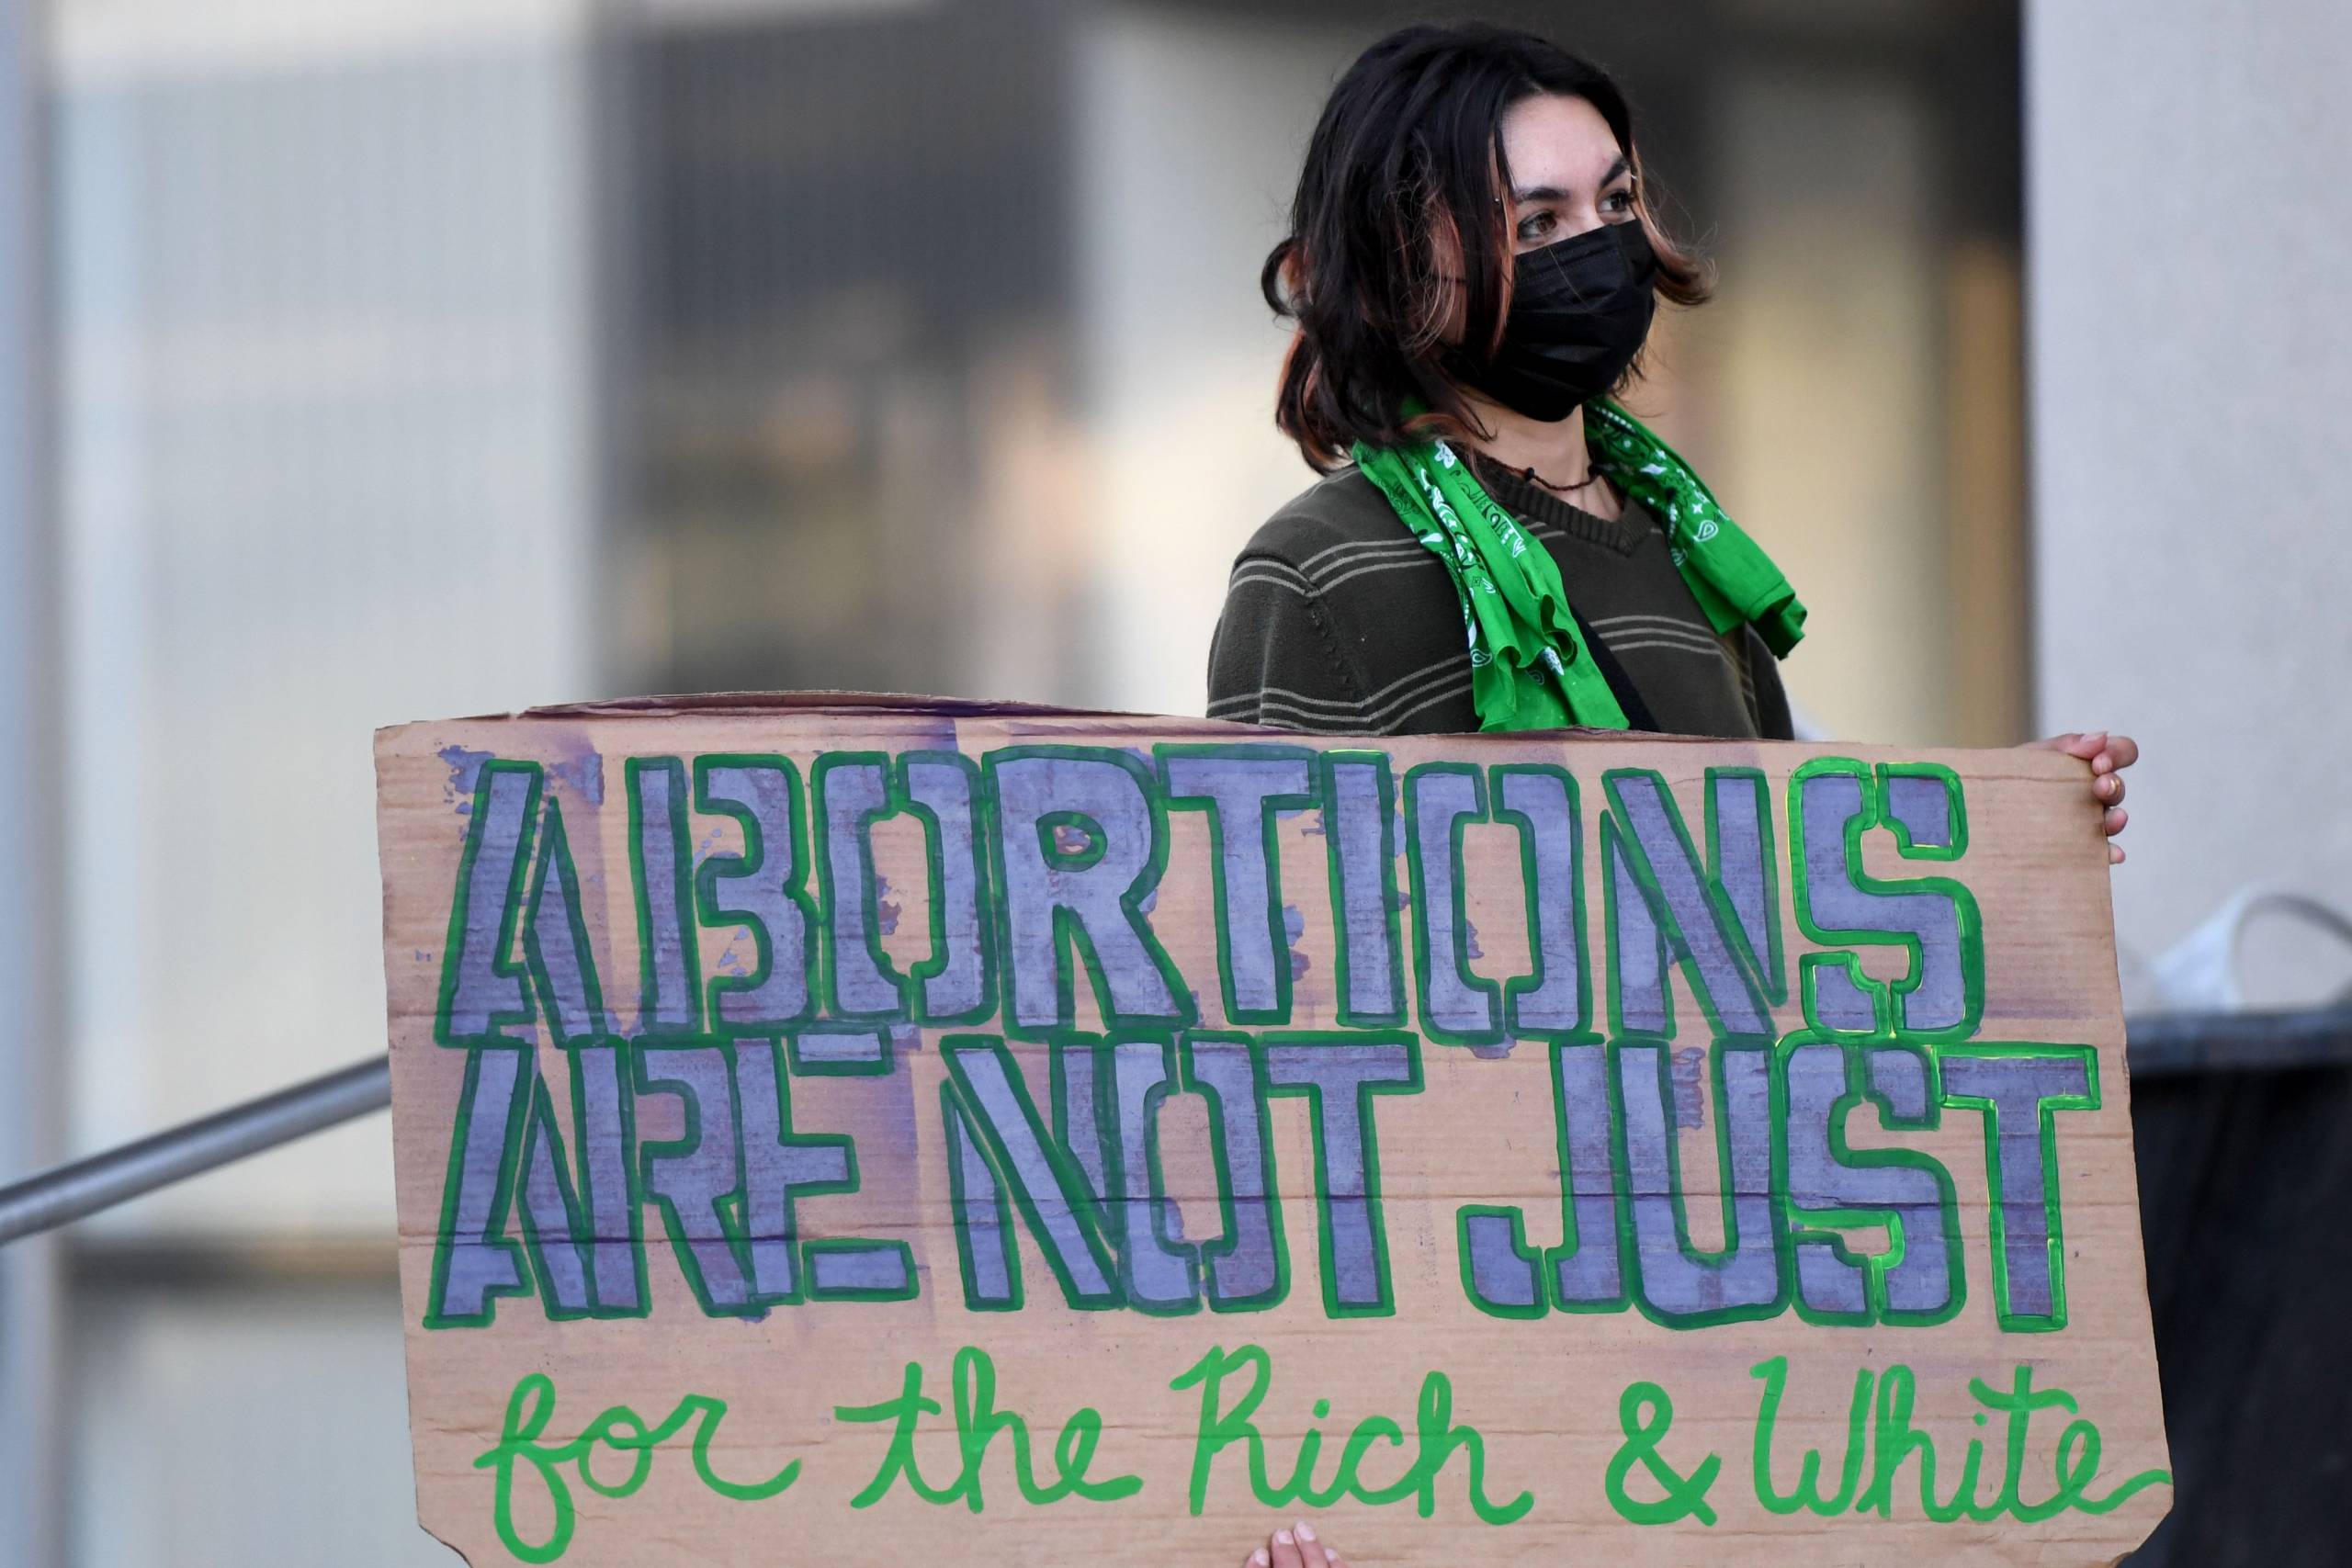 A person bears a very large sign made out of cardboard, which reads: "Abortions are not just for the rich and white."